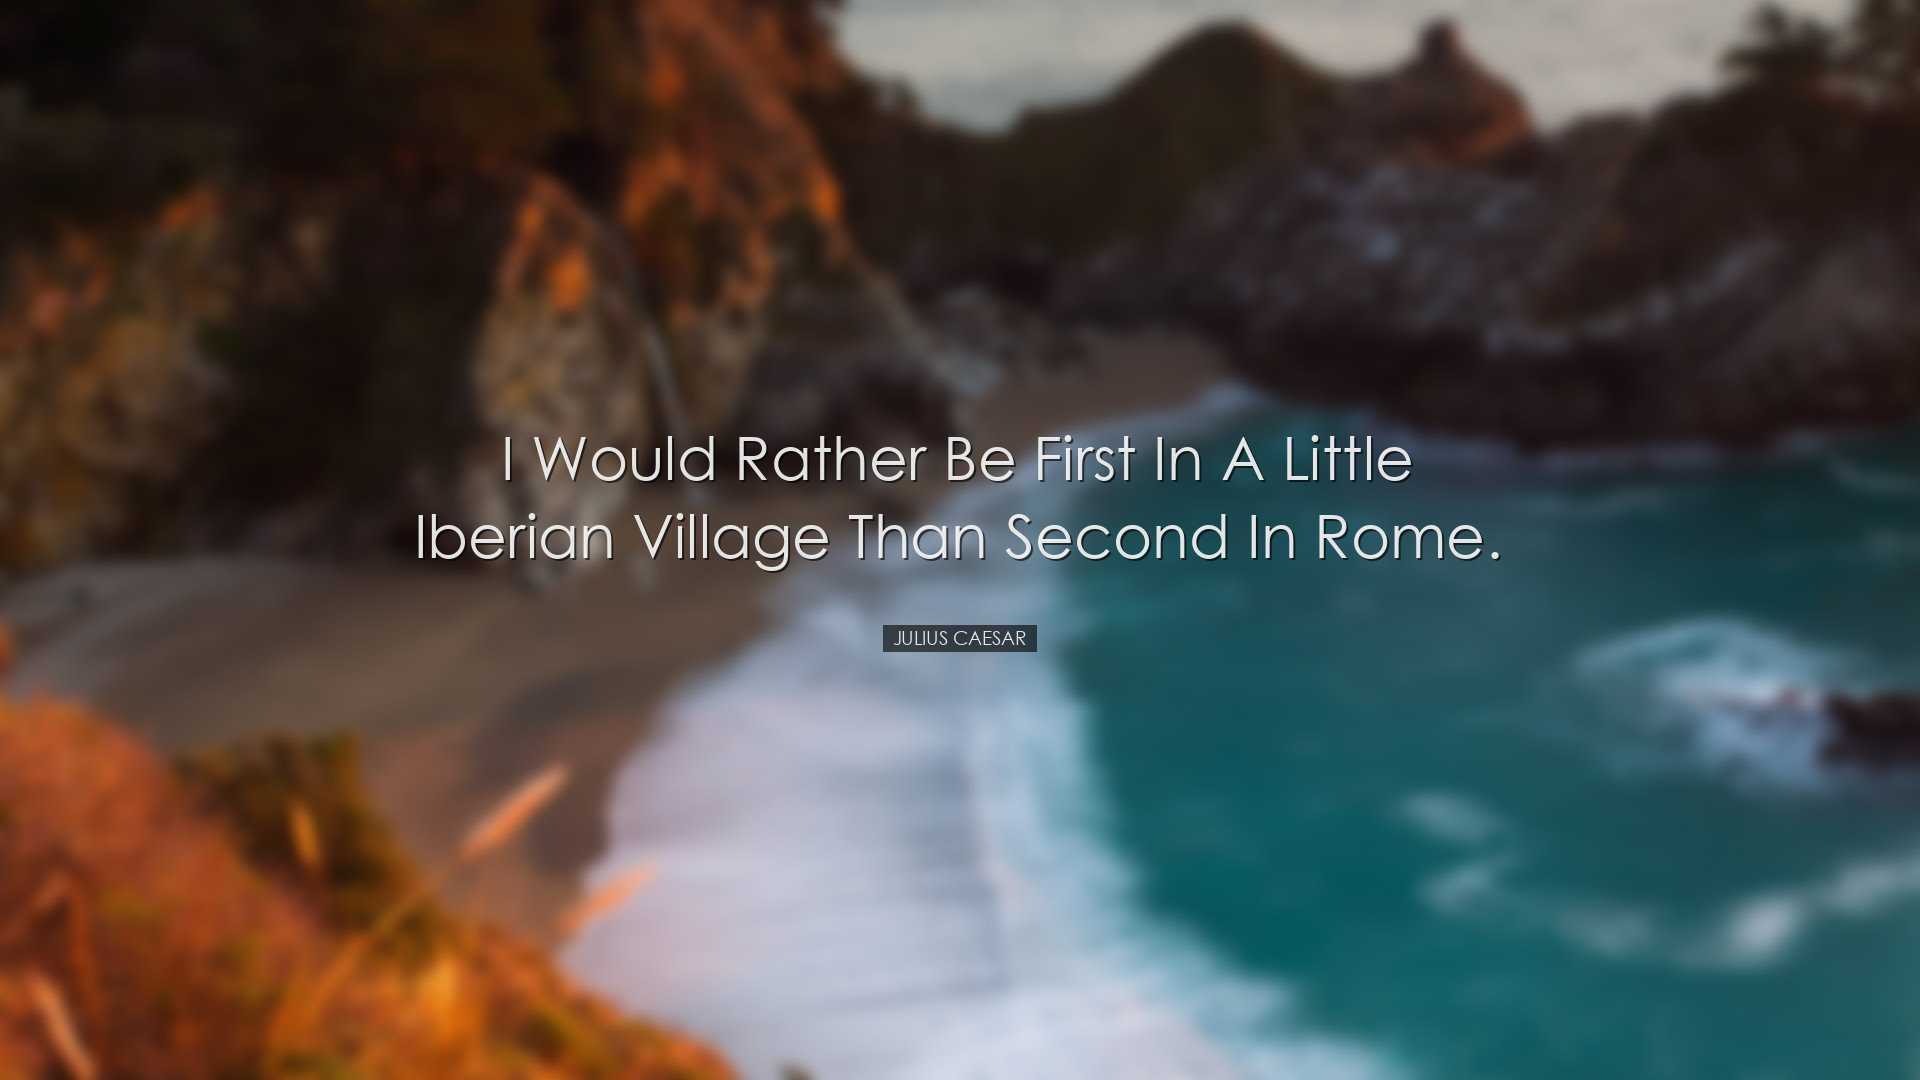 I would rather be first in a little Iberian village than second in